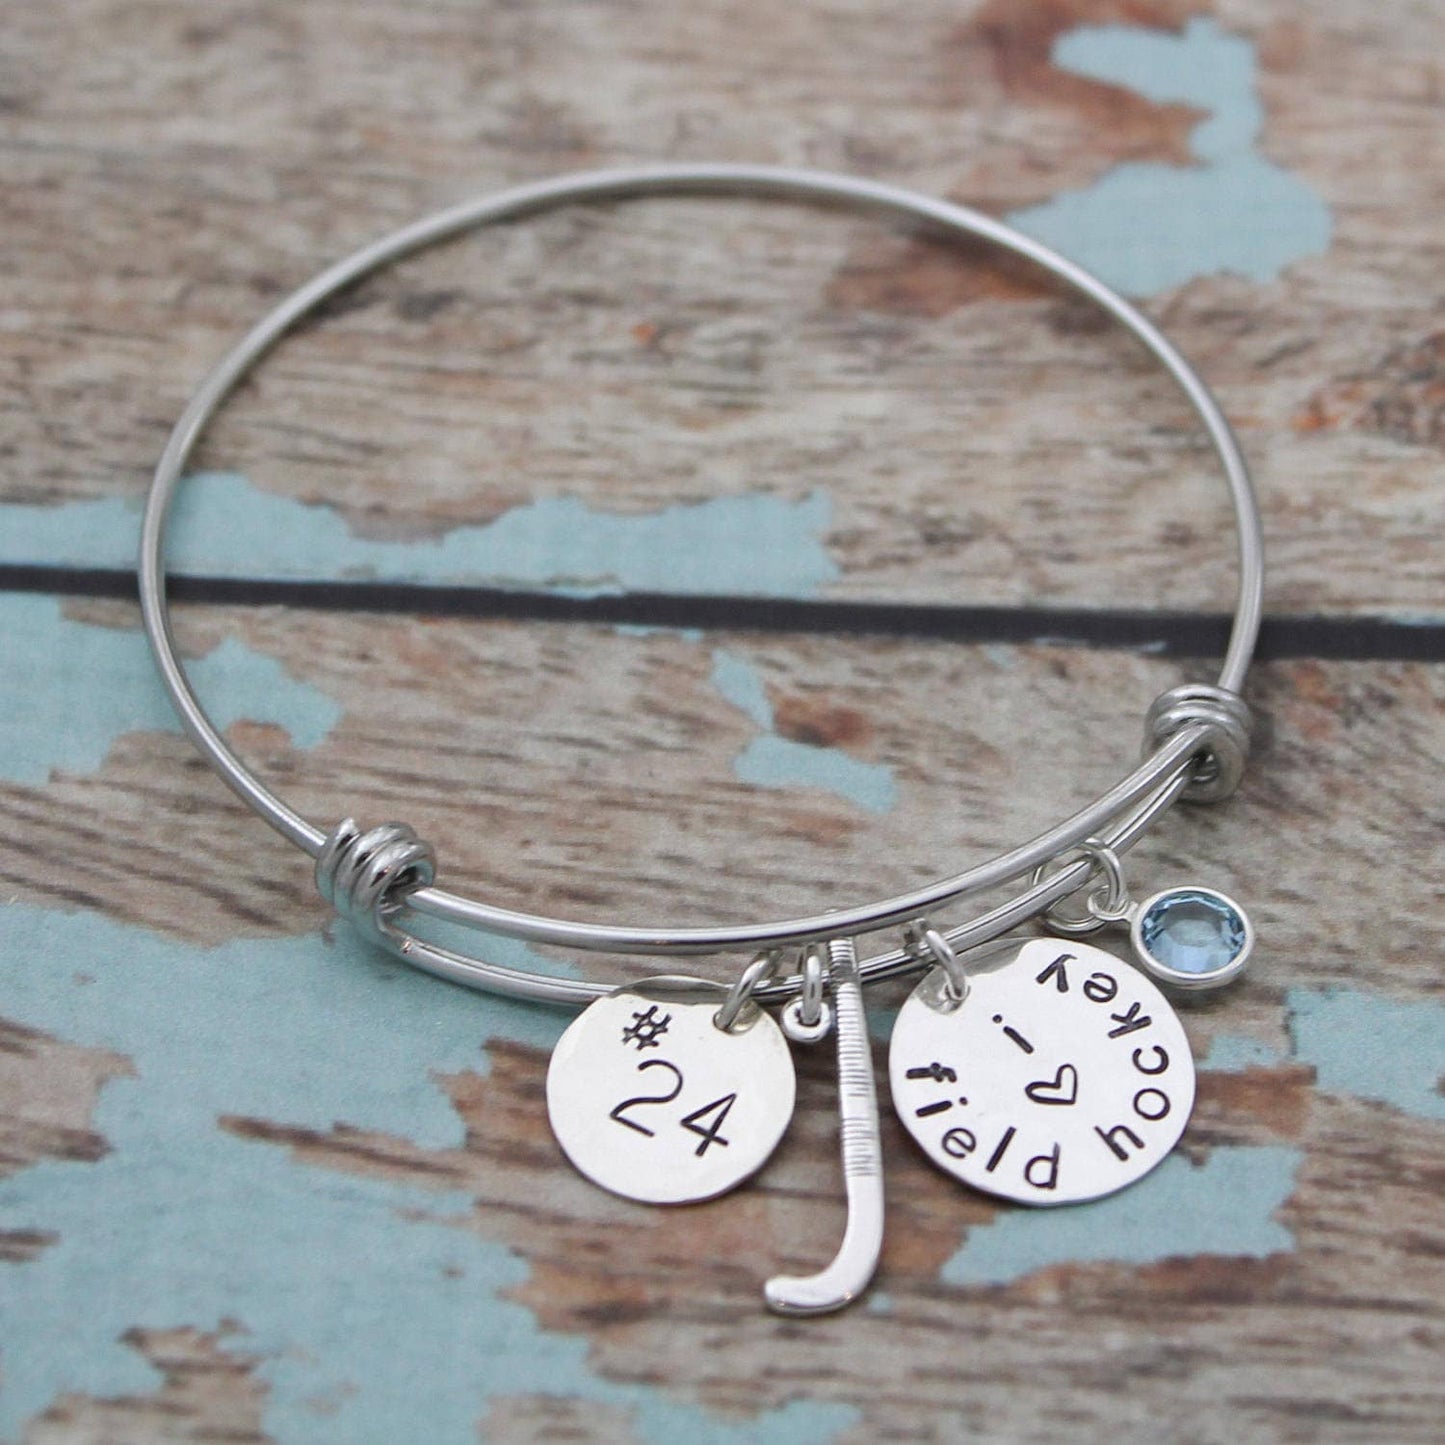 Personalized Sport Bangle, Choose Your Sport, Field Hockey, Lacrosse, Basketball, Volleyball, Soccer, Swimming, Skiing, Hand Stamped Jewelry